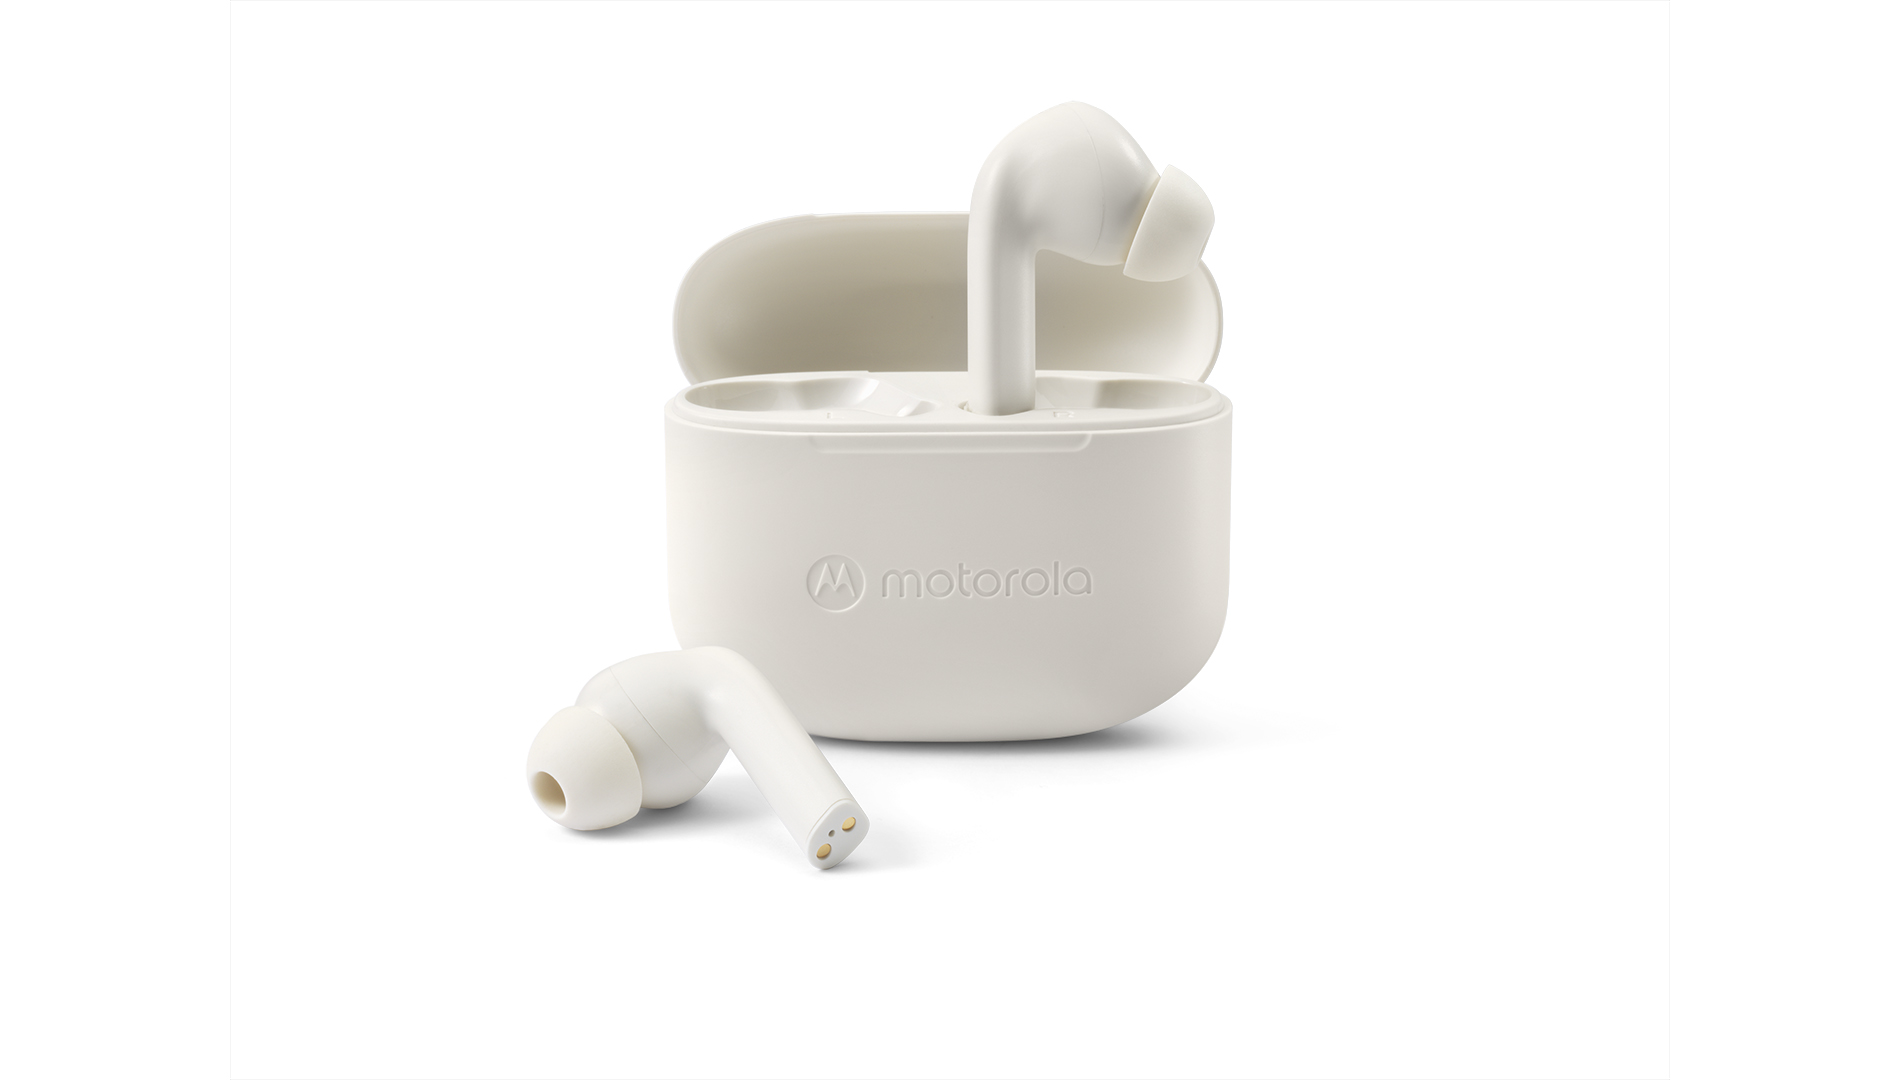 MOTO BUDS 065 True Wireless Earbuds in White - Product image